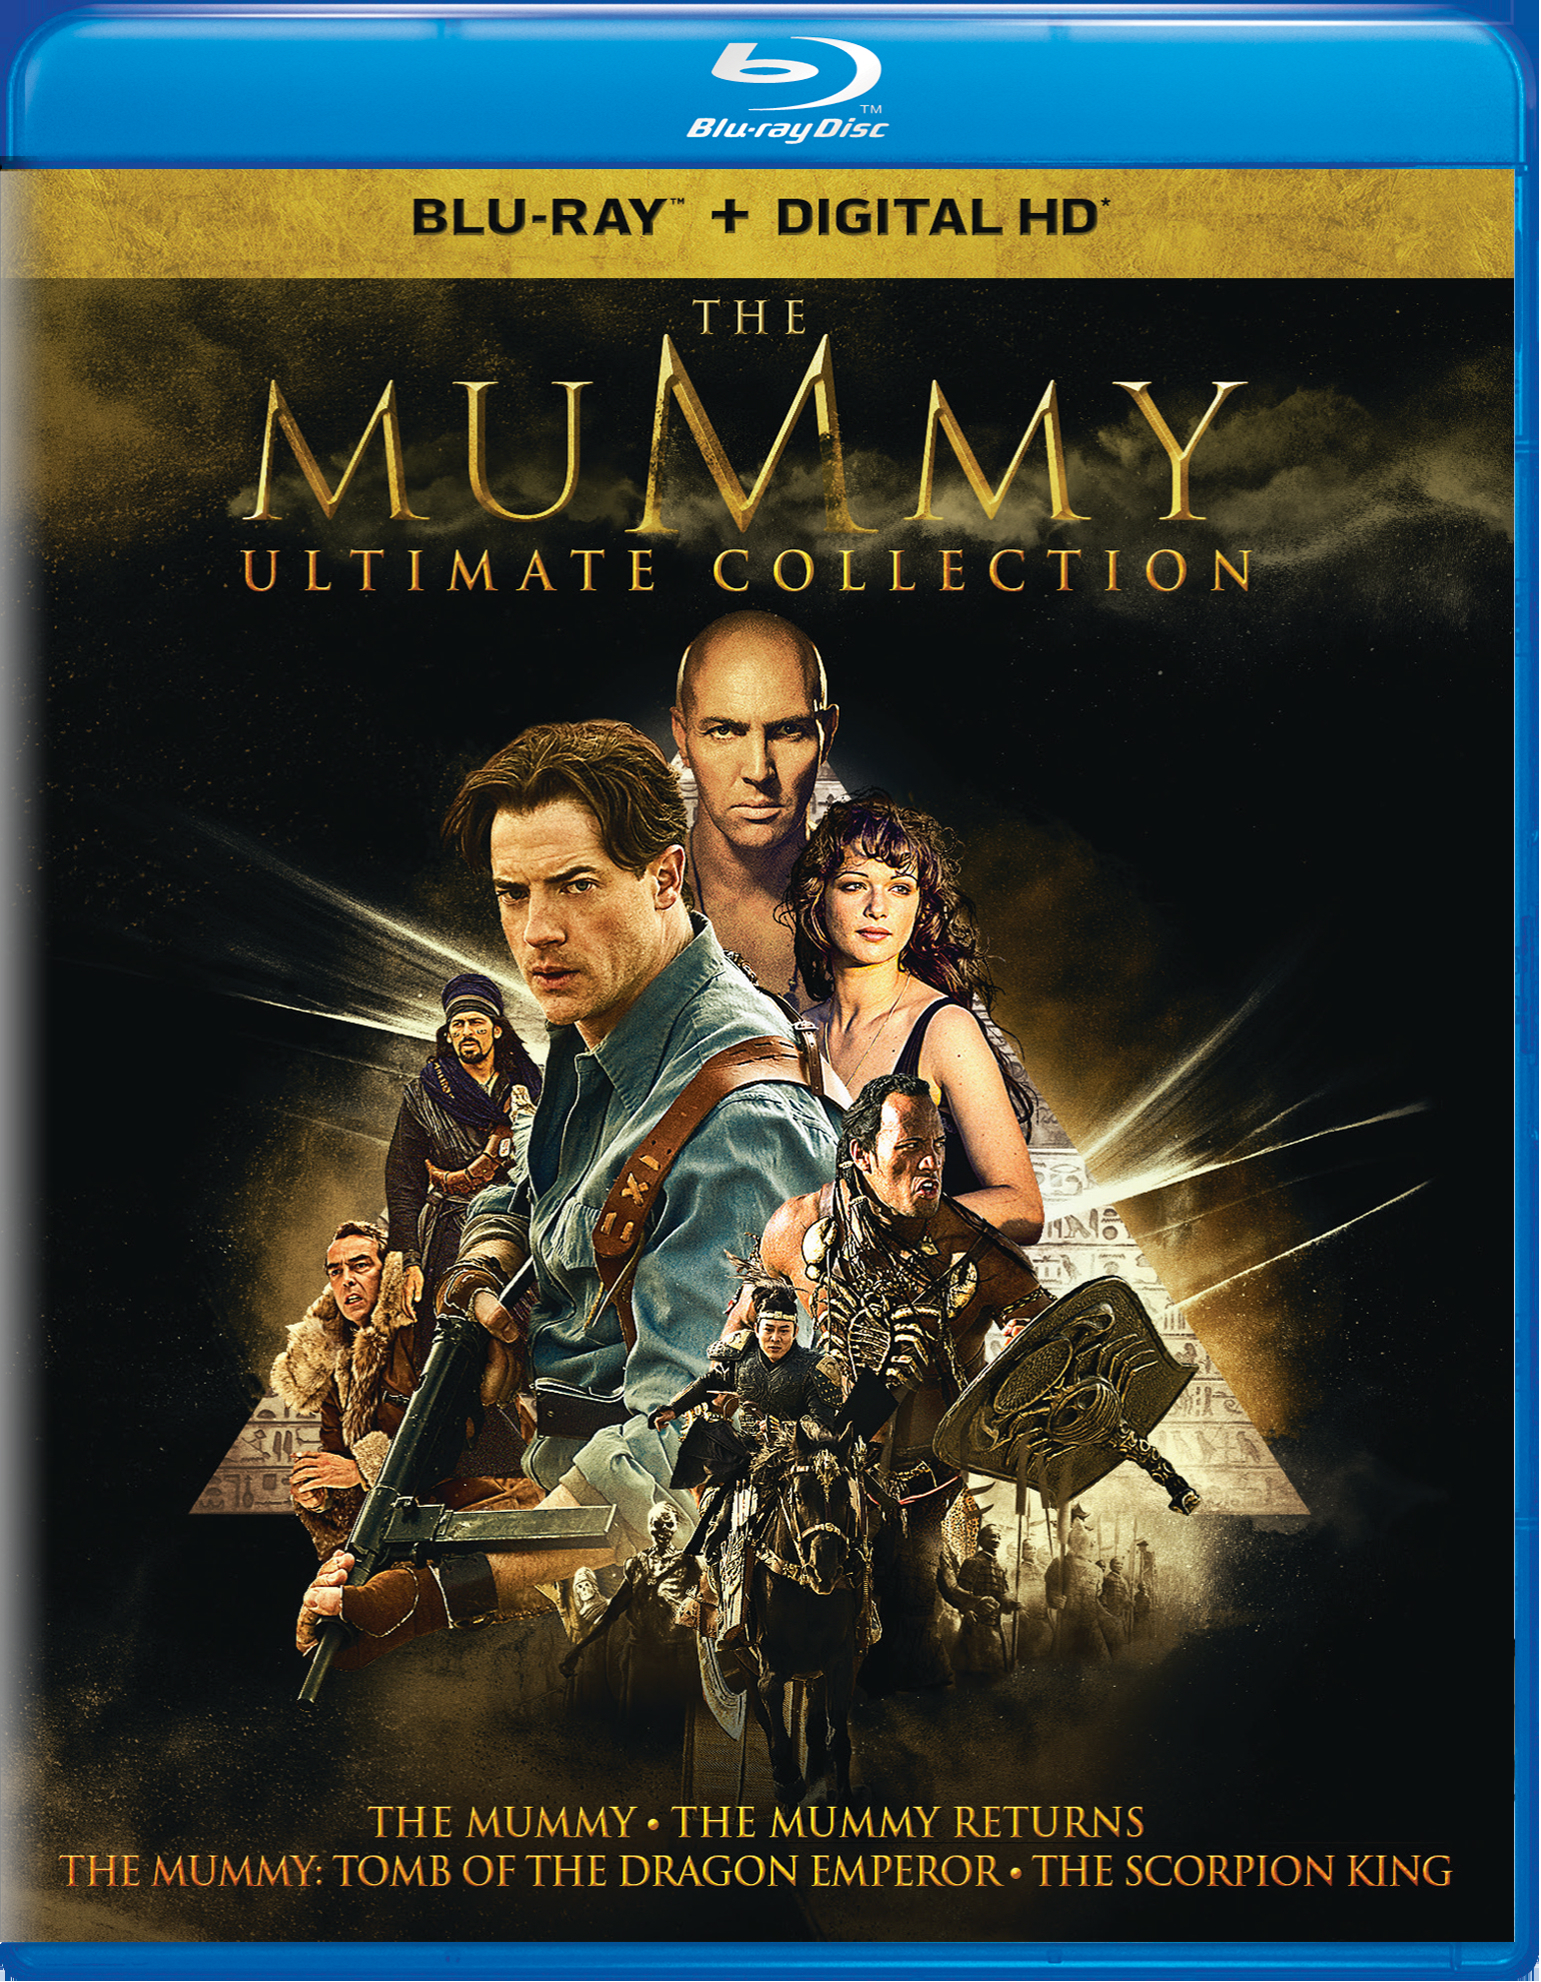 The Mummy Ultimate Collection (Box Set) - Blu-ray   - Action Movies On Blu-ray - Movies On GRUV